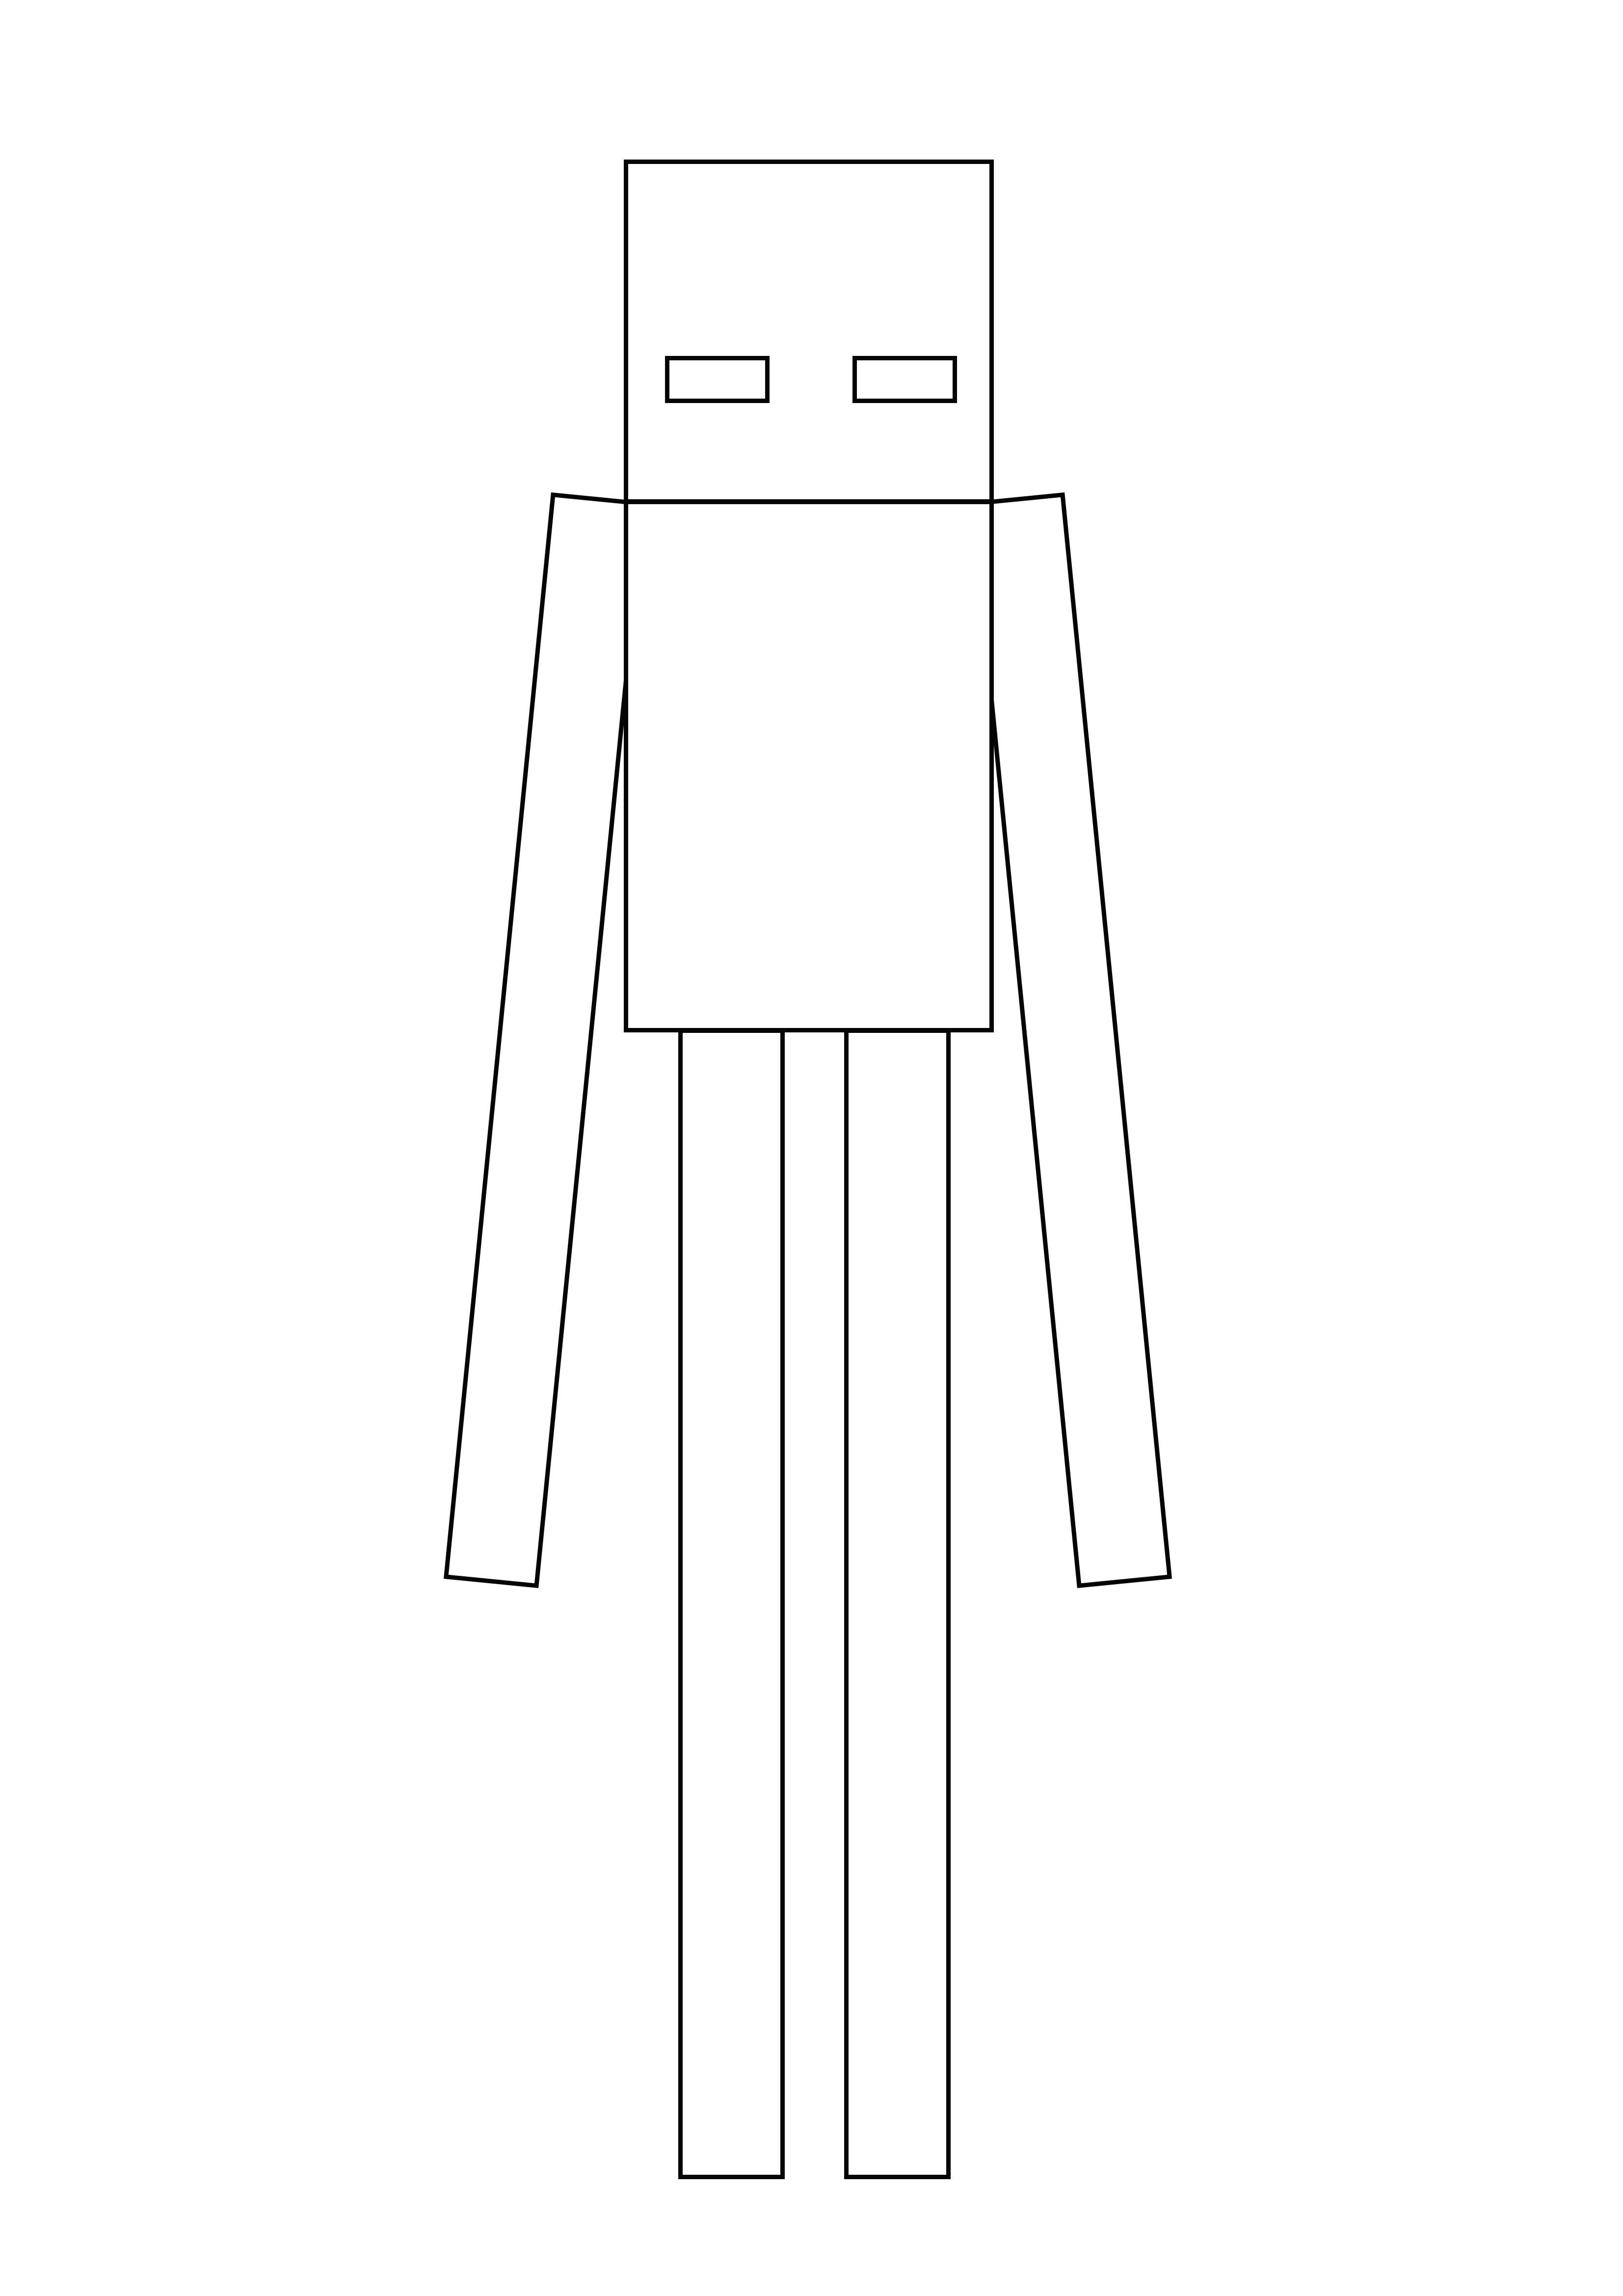 Minecraft Enderman freebie is here to be printed and colored easily by kids